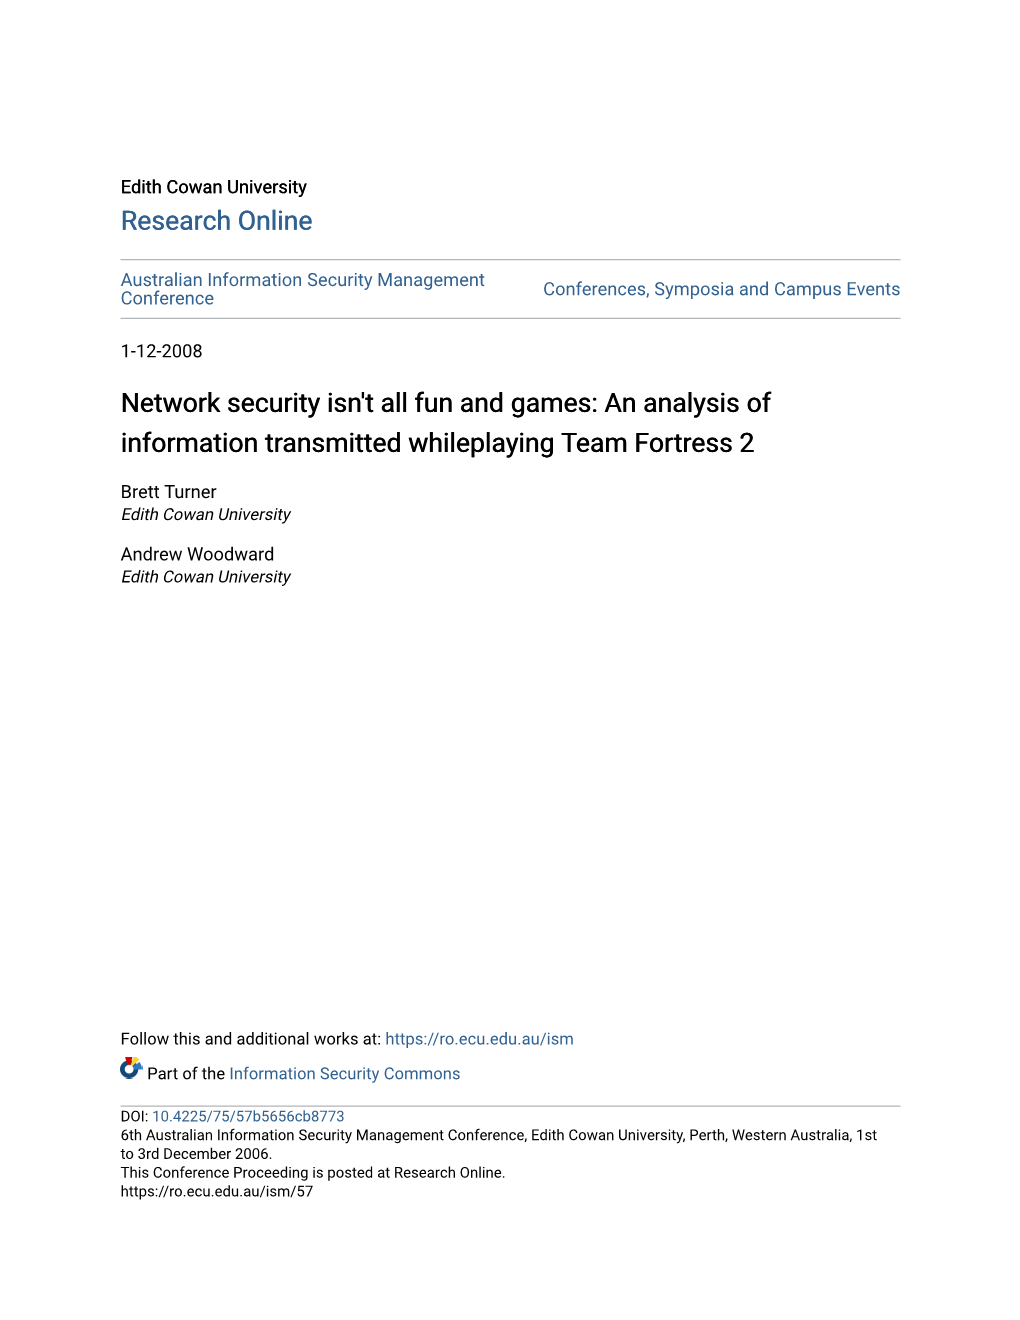 Network Security Isn't All Fun and Games: an Analysis of Information Transmitted Whileplaying Team Fortress 2